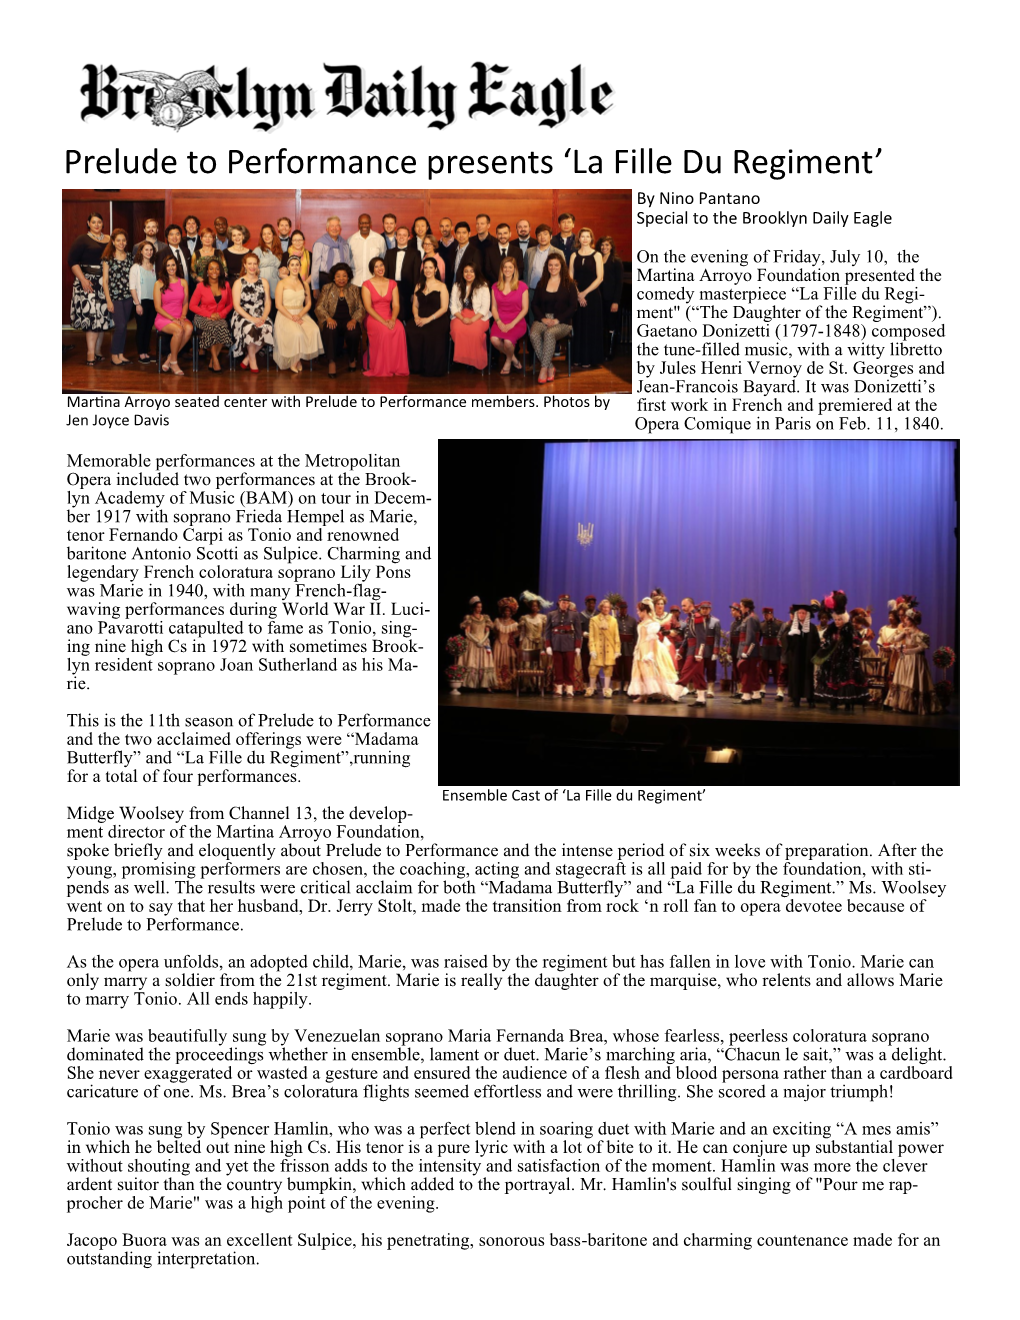 La Fille Du Regiment’ by Nino Pantano Special to the Brooklyn Daily Eagle